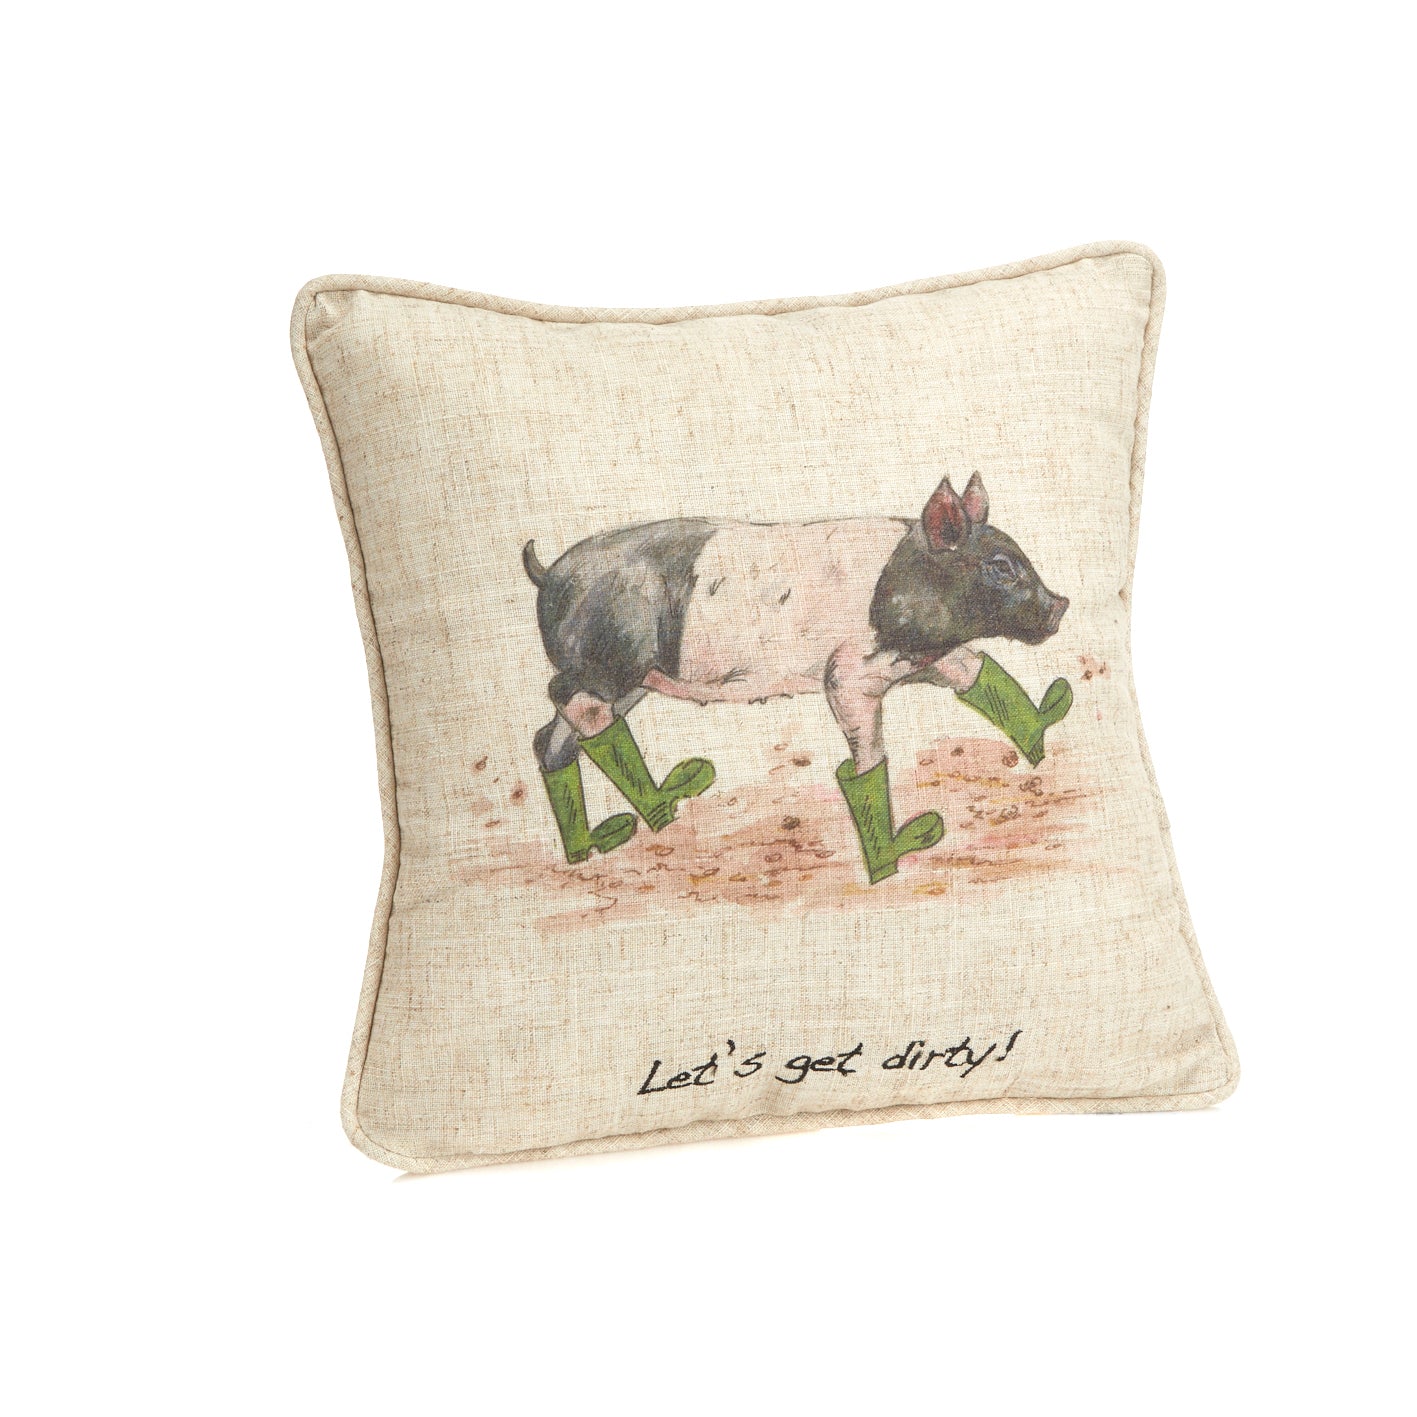 Let's Get Dirty! Cushion